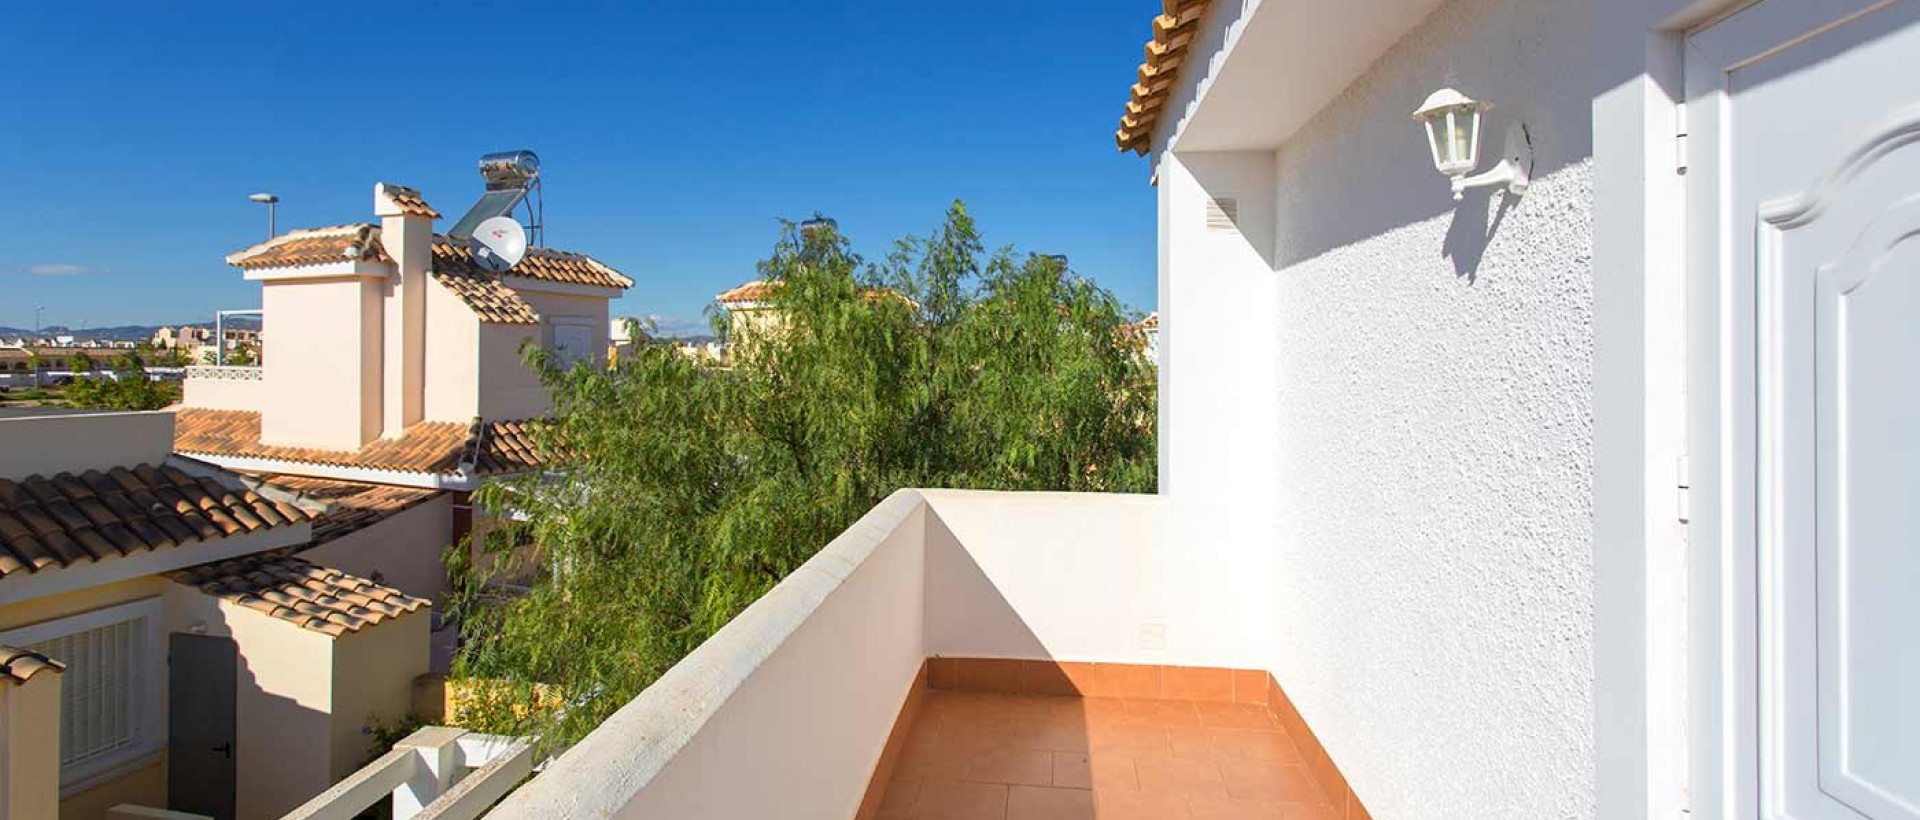 Villa in Spanish style for sale on New Sierra Golf in Balsicas, Torre-Pacheco, Costa Calida